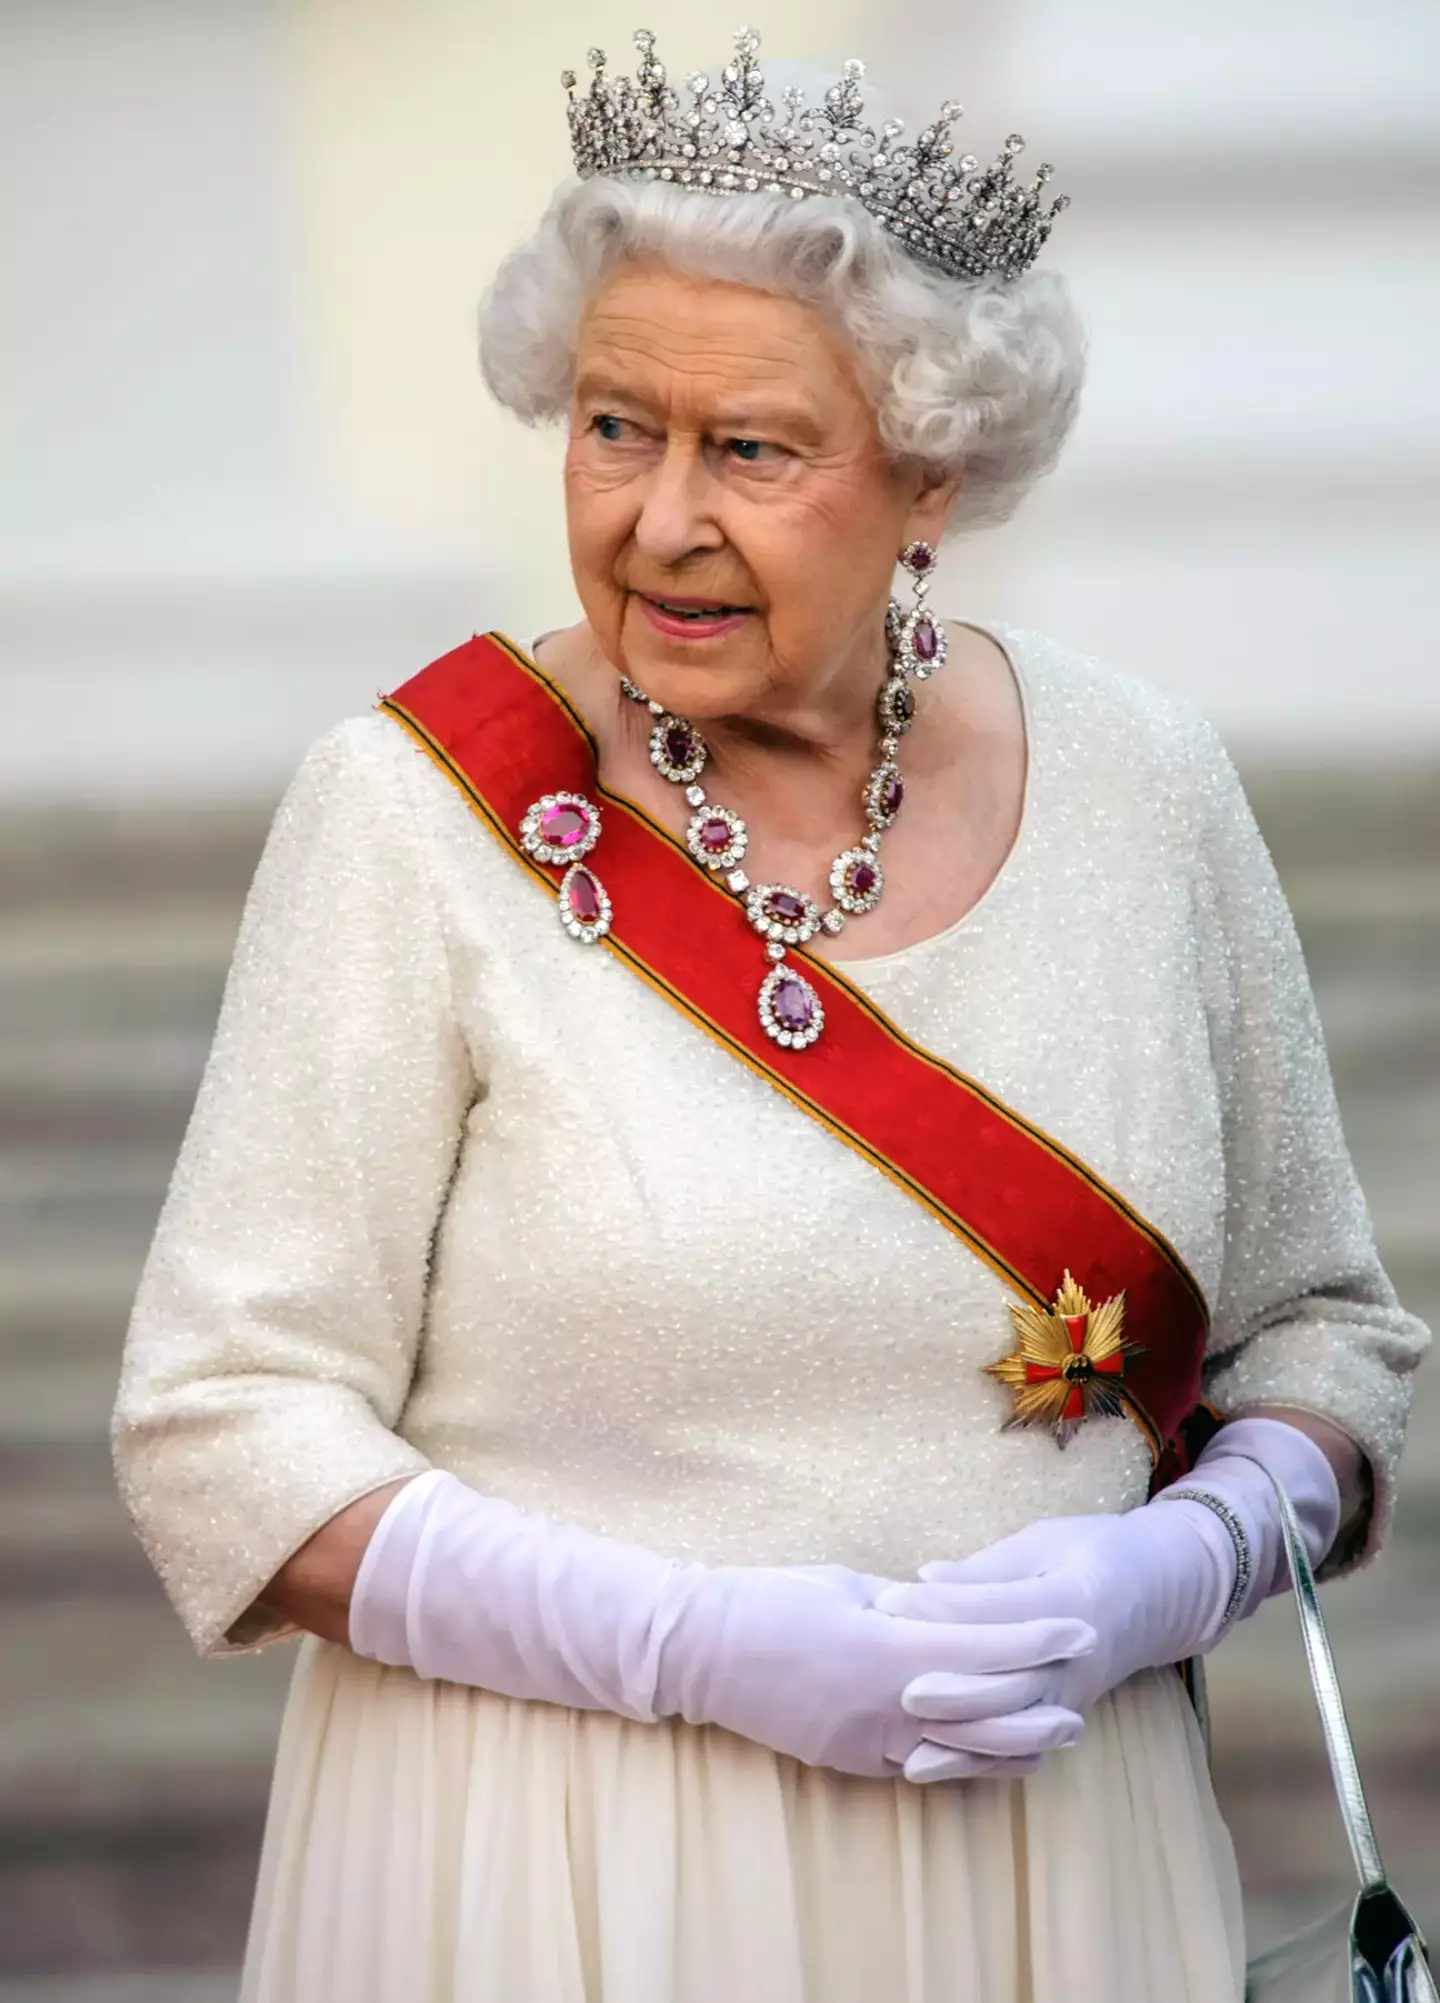 The Queen’s funeral will take place on 19 September at Westminster Abbey.